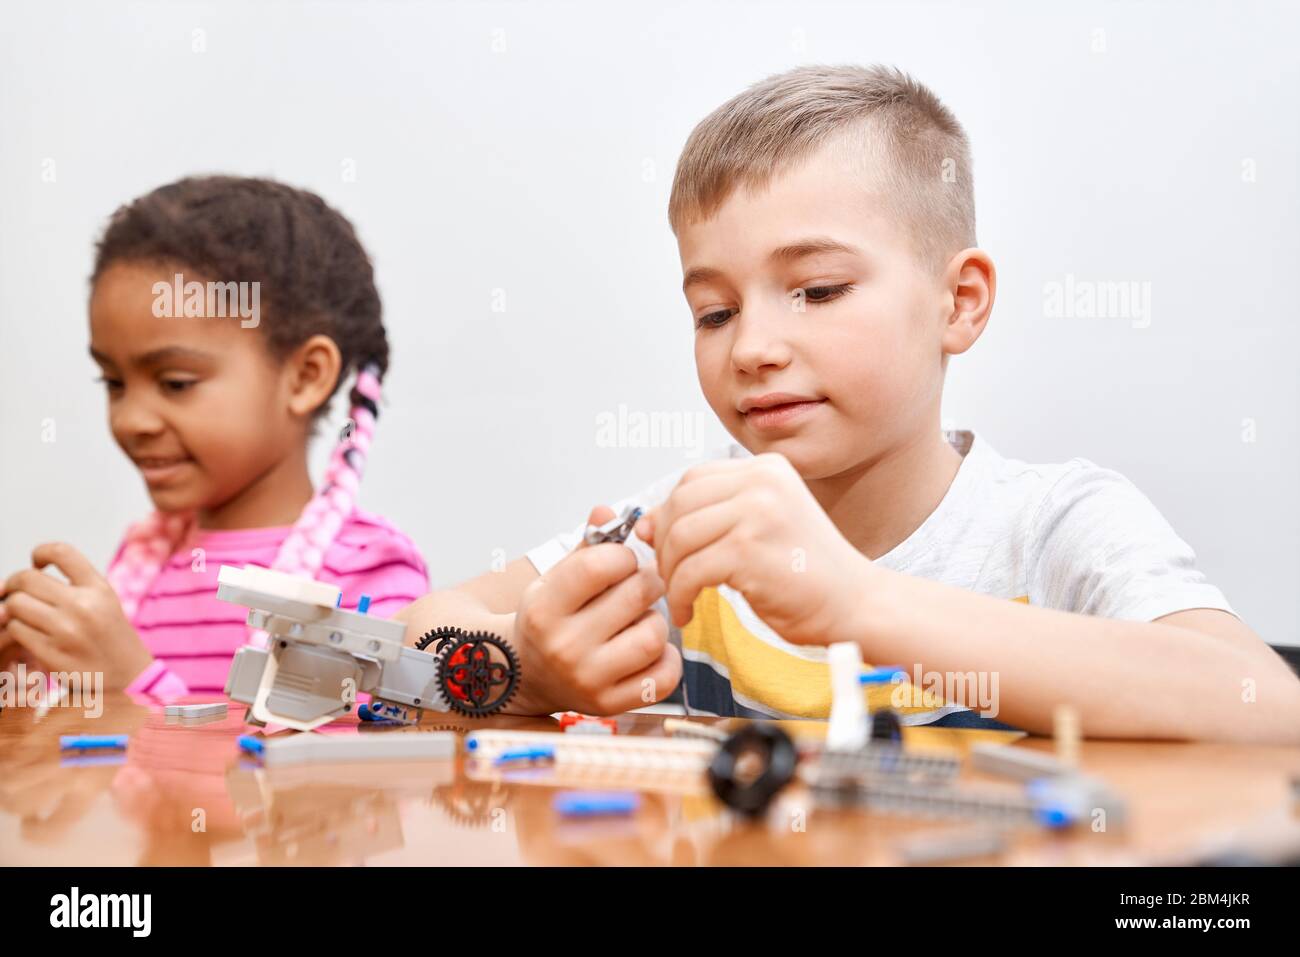 Front view of building kit for group of multiracial kids creating toys, having positive emotions and joy. Selective focus of lovely caucasian boy working on project, taking colorful parts. Stock Photo